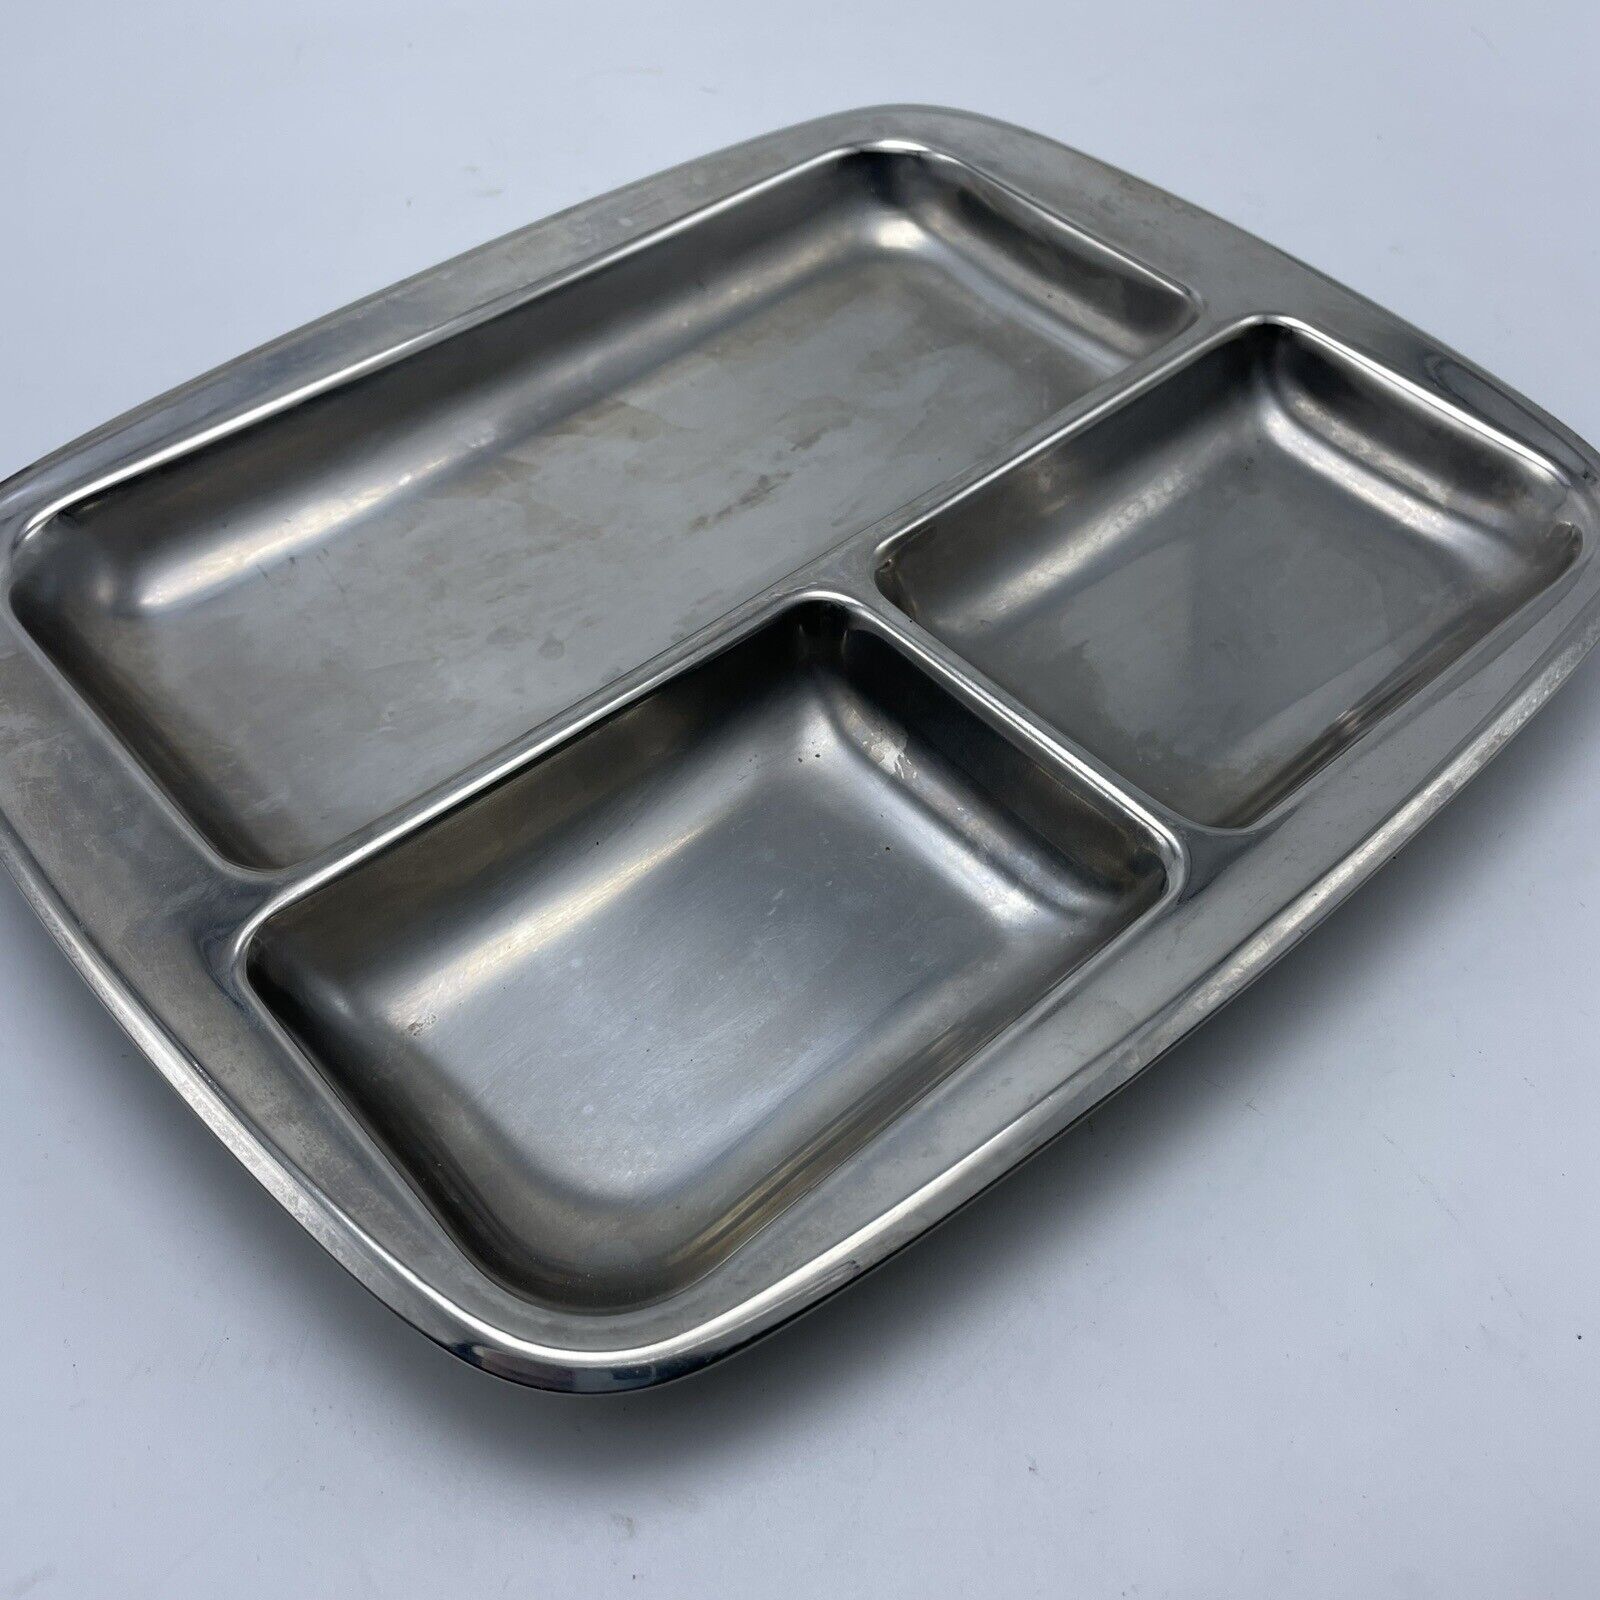 Vtg MCM WMF Cromargan Stainless Divided Dinner Lunch Tray 3 Sections Cafeteria